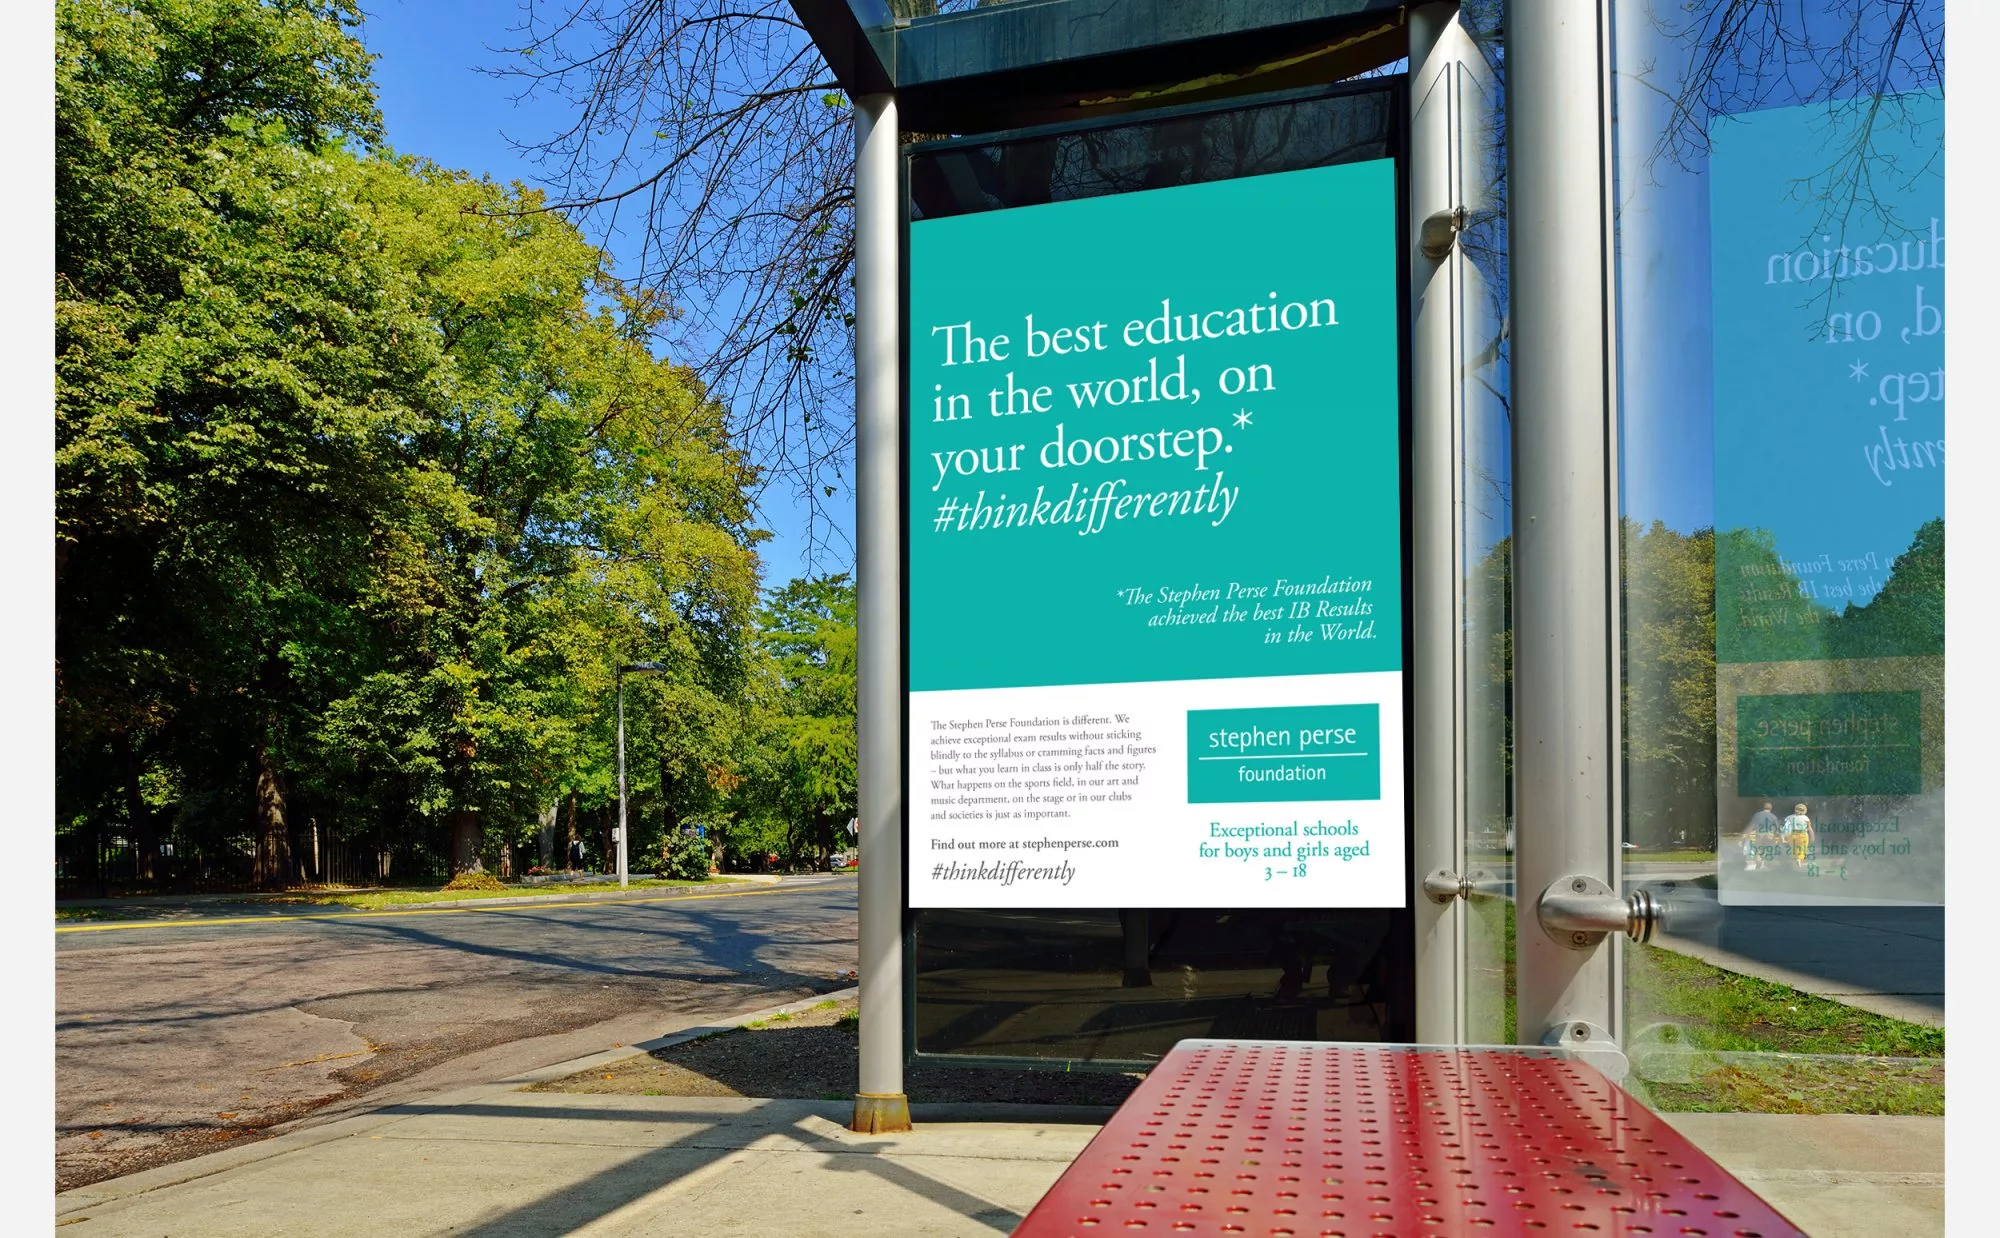 SPF Learning Advertising in situ by Peek Creative Limited